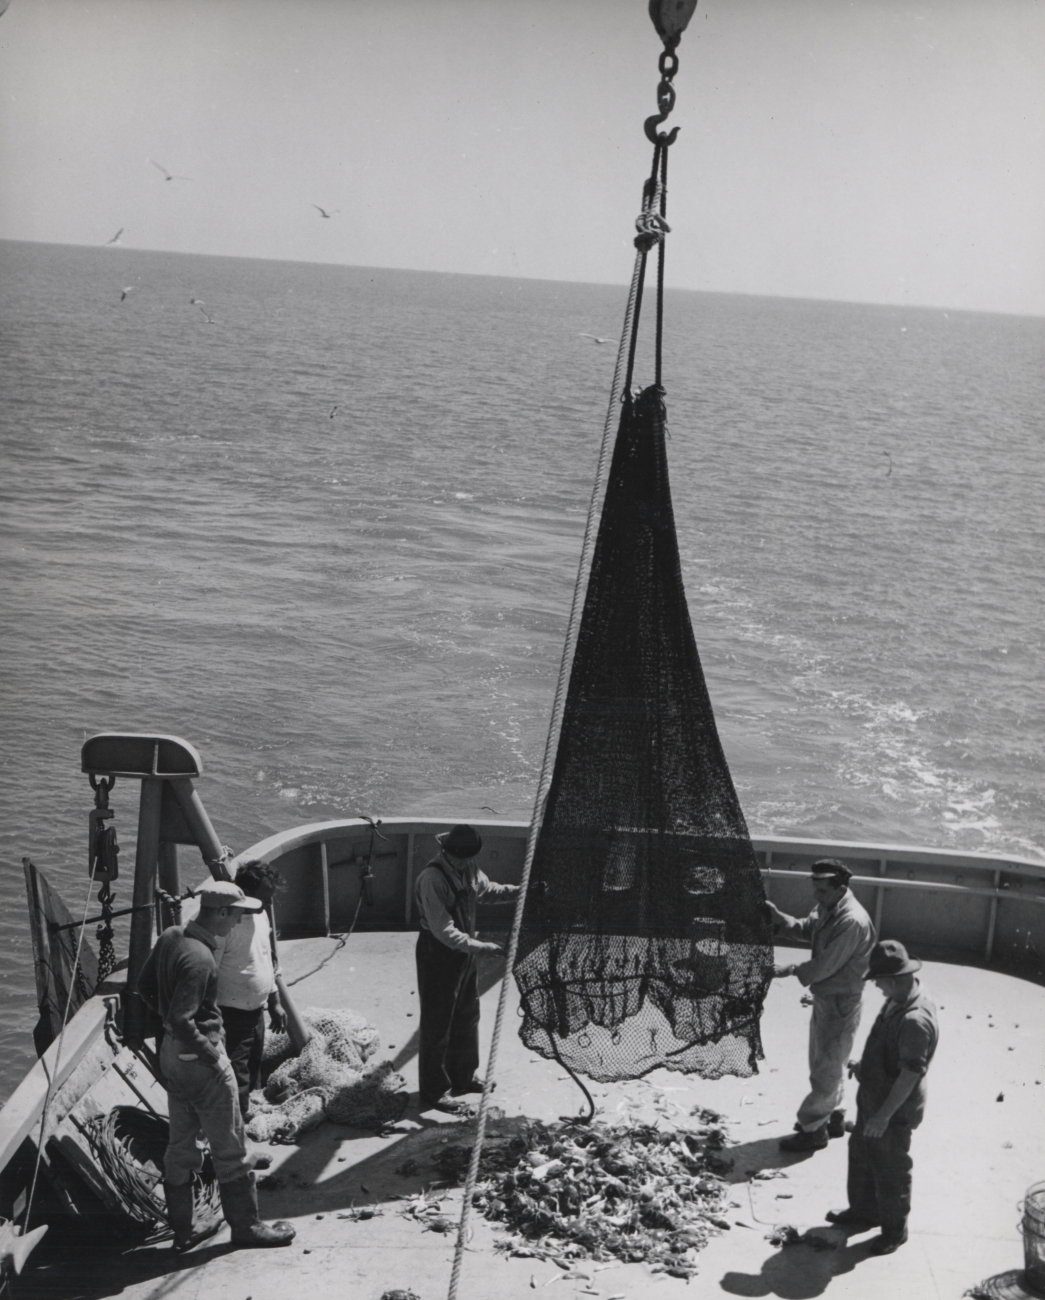 Emptying trawl net on deck with catch of crabs and small fish